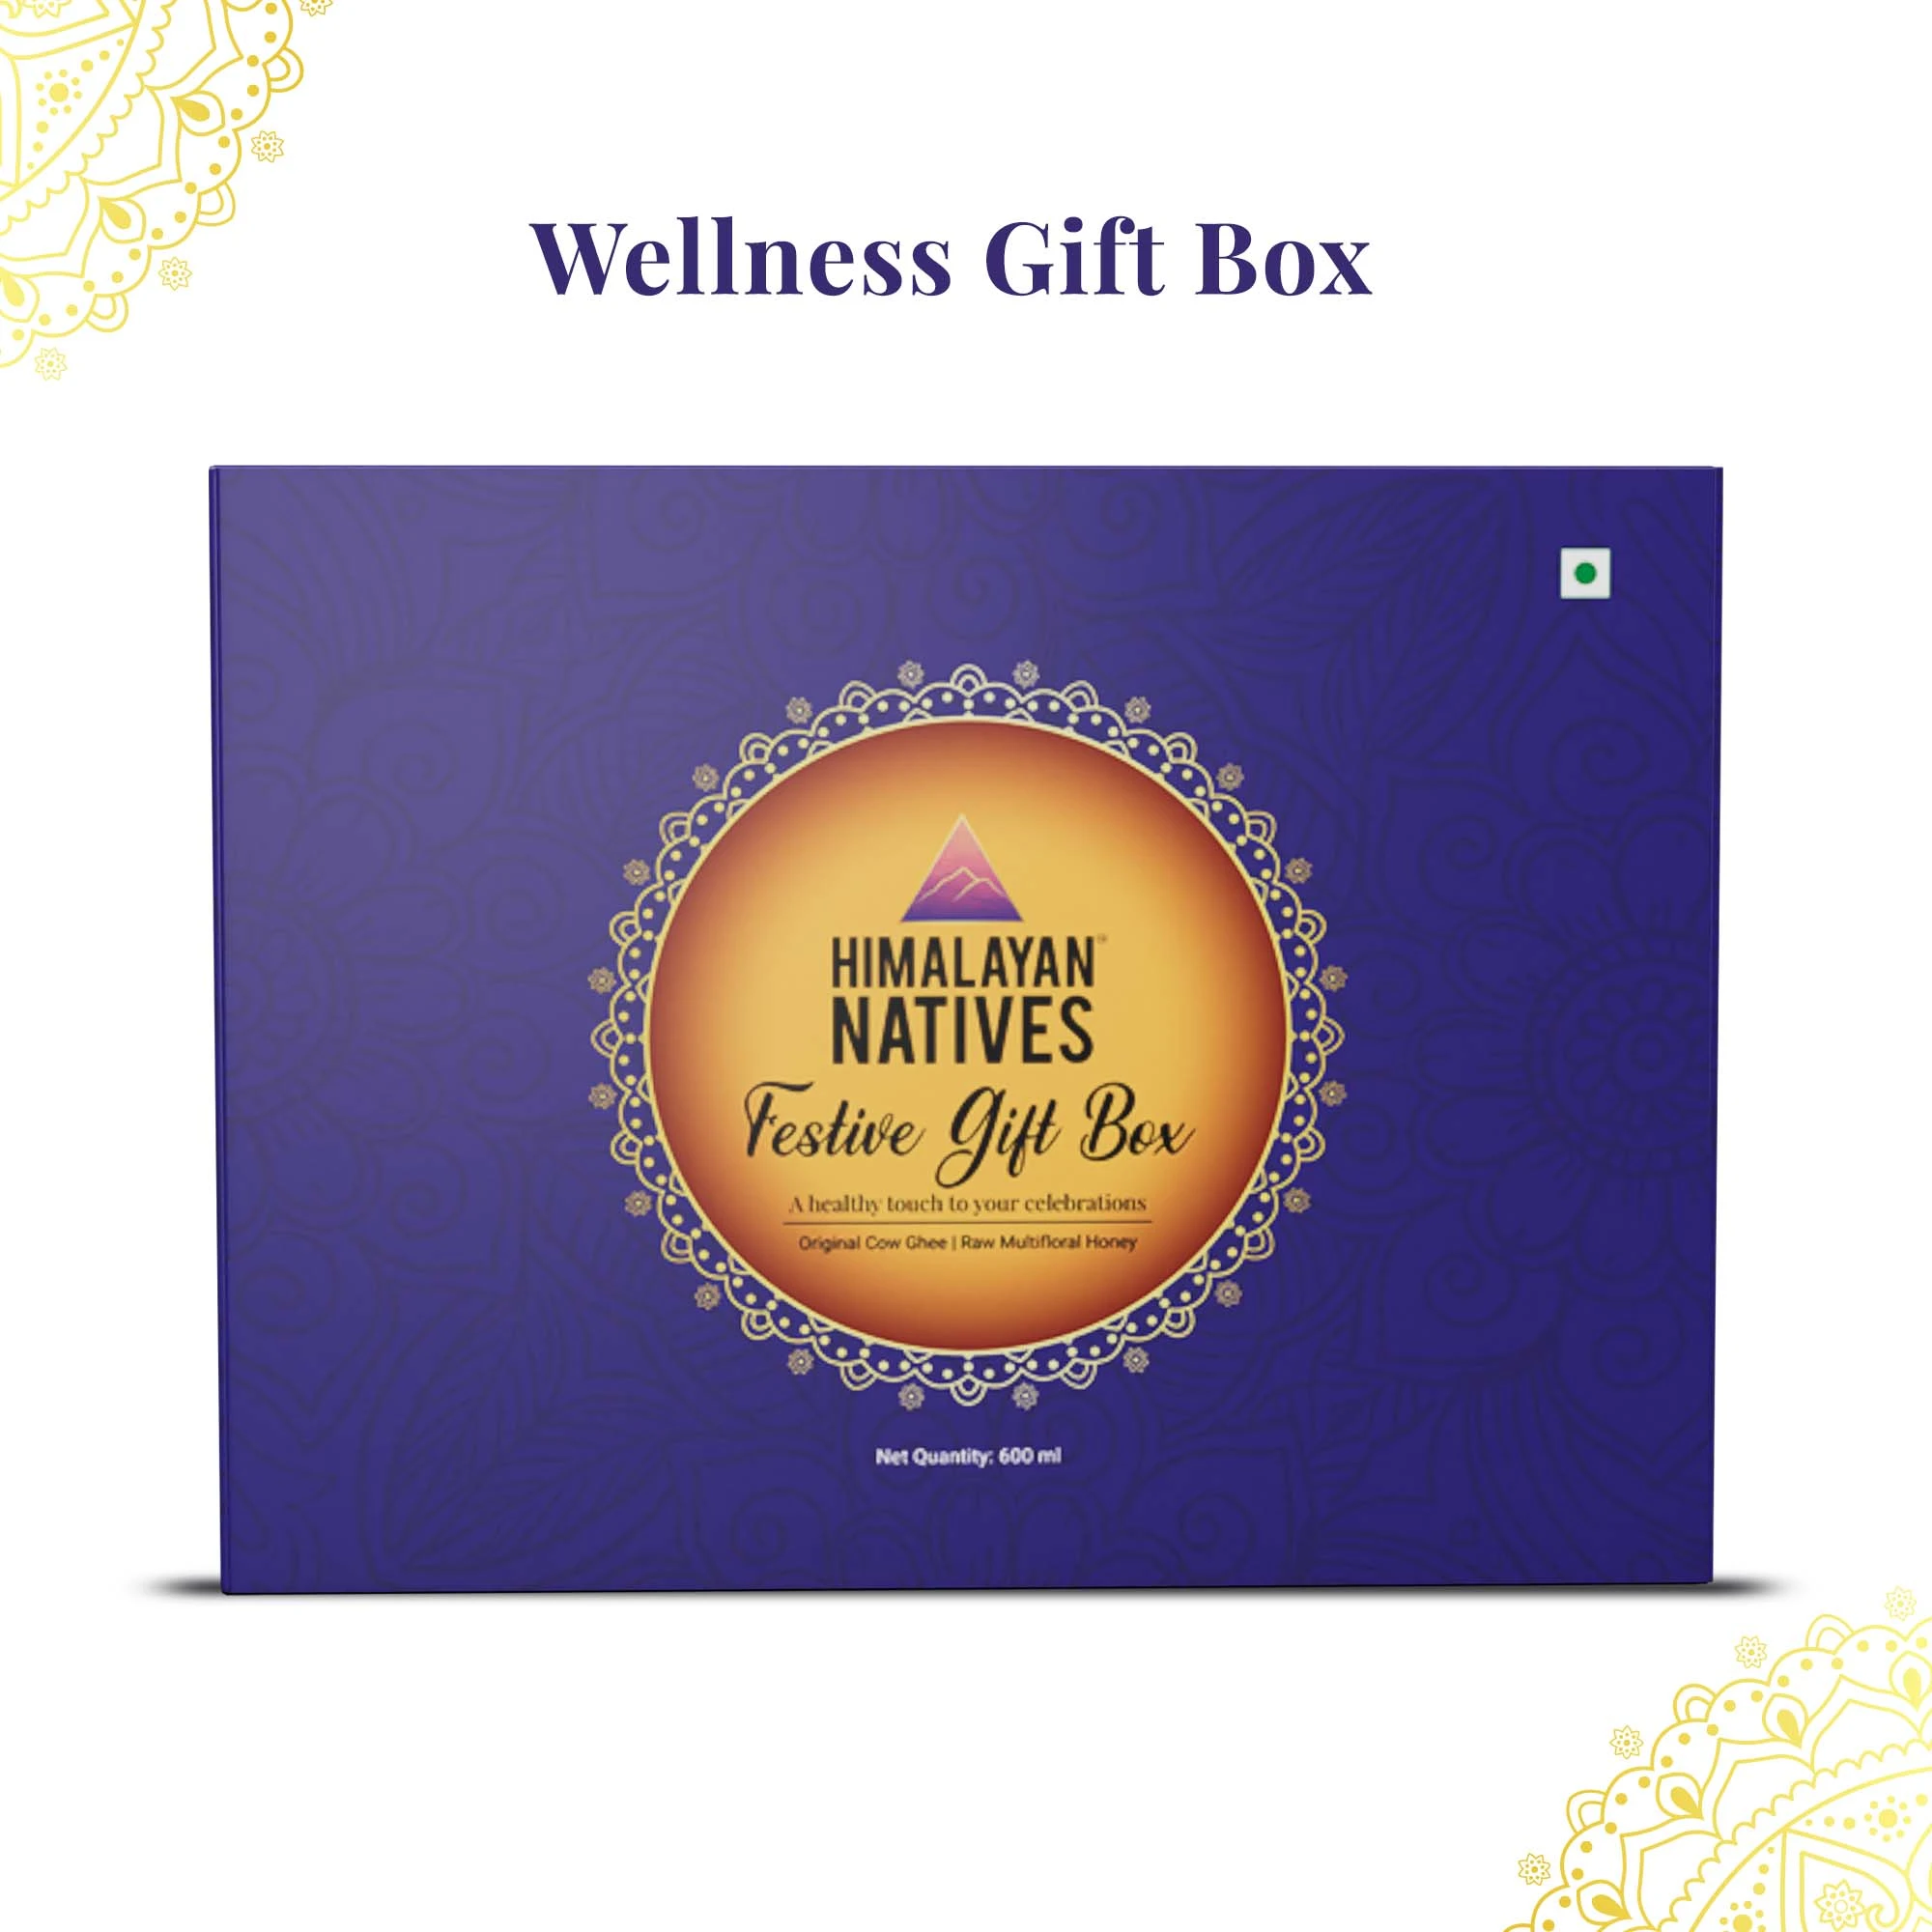 himalayan natives wellness gift collection - product group